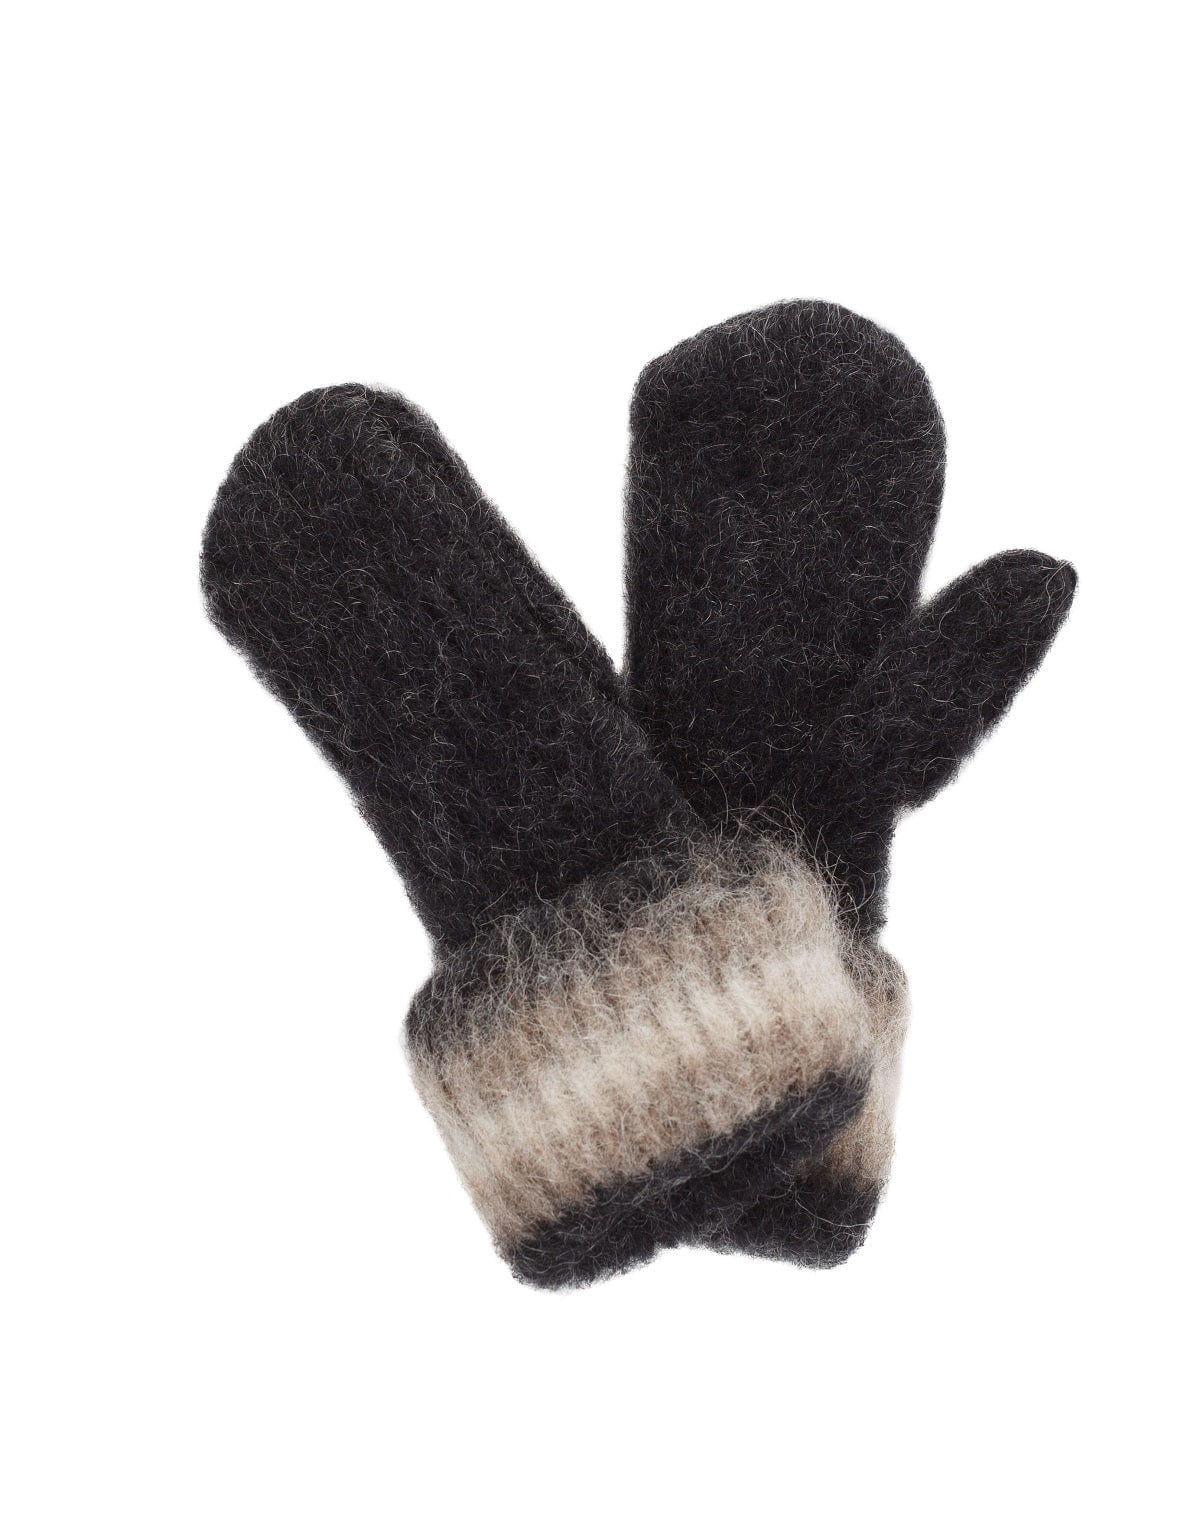 Brushed Wool Mittens - Black, Brown and White - The Icelandic Store